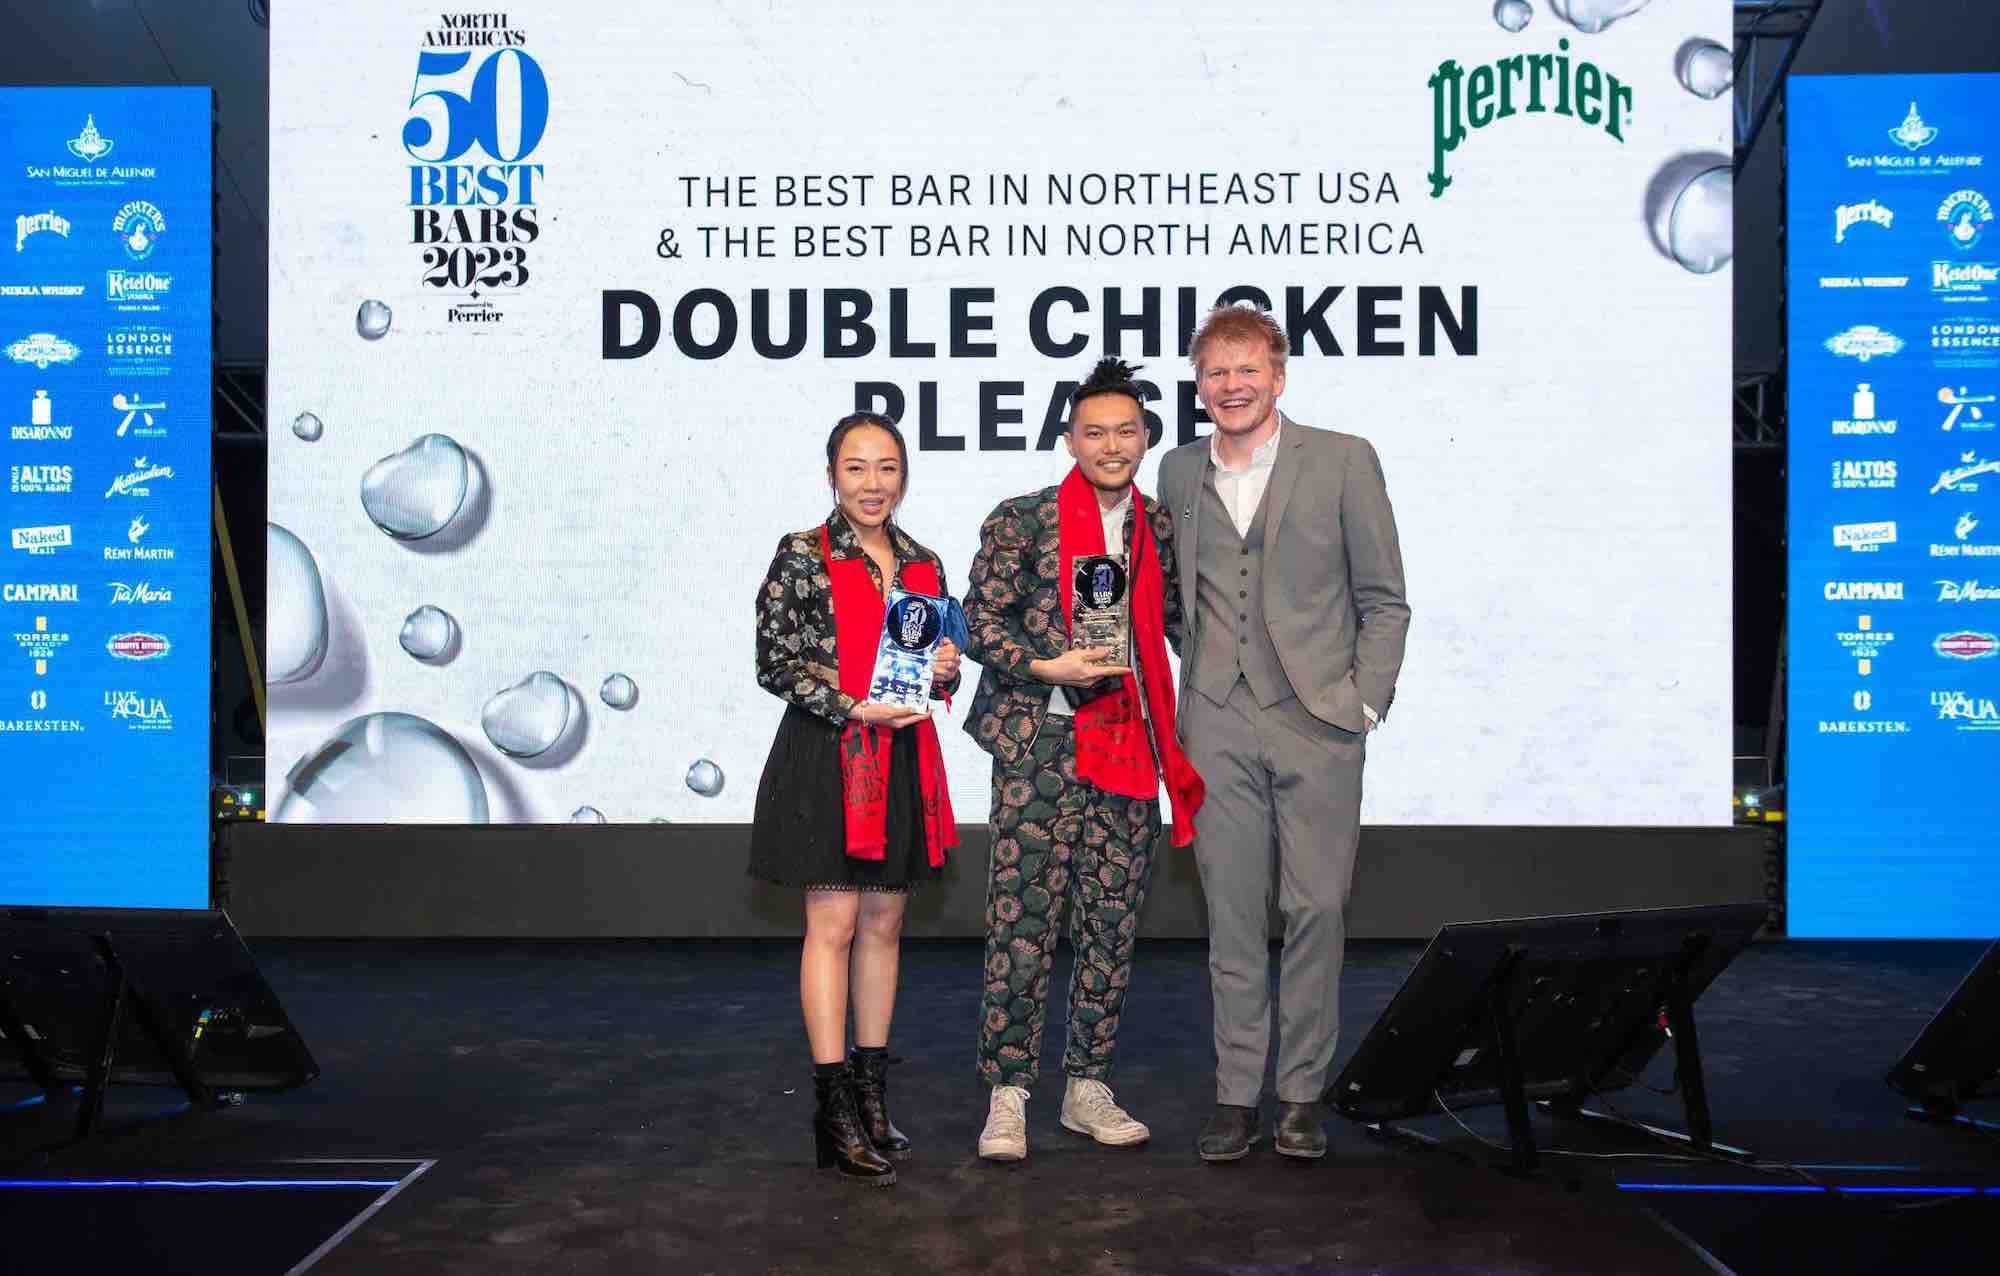 North America's 50 Best Bars 2023 The Best Bar in North America & The Best Bar in Northeast USA, sponsored by Perrier.jpg